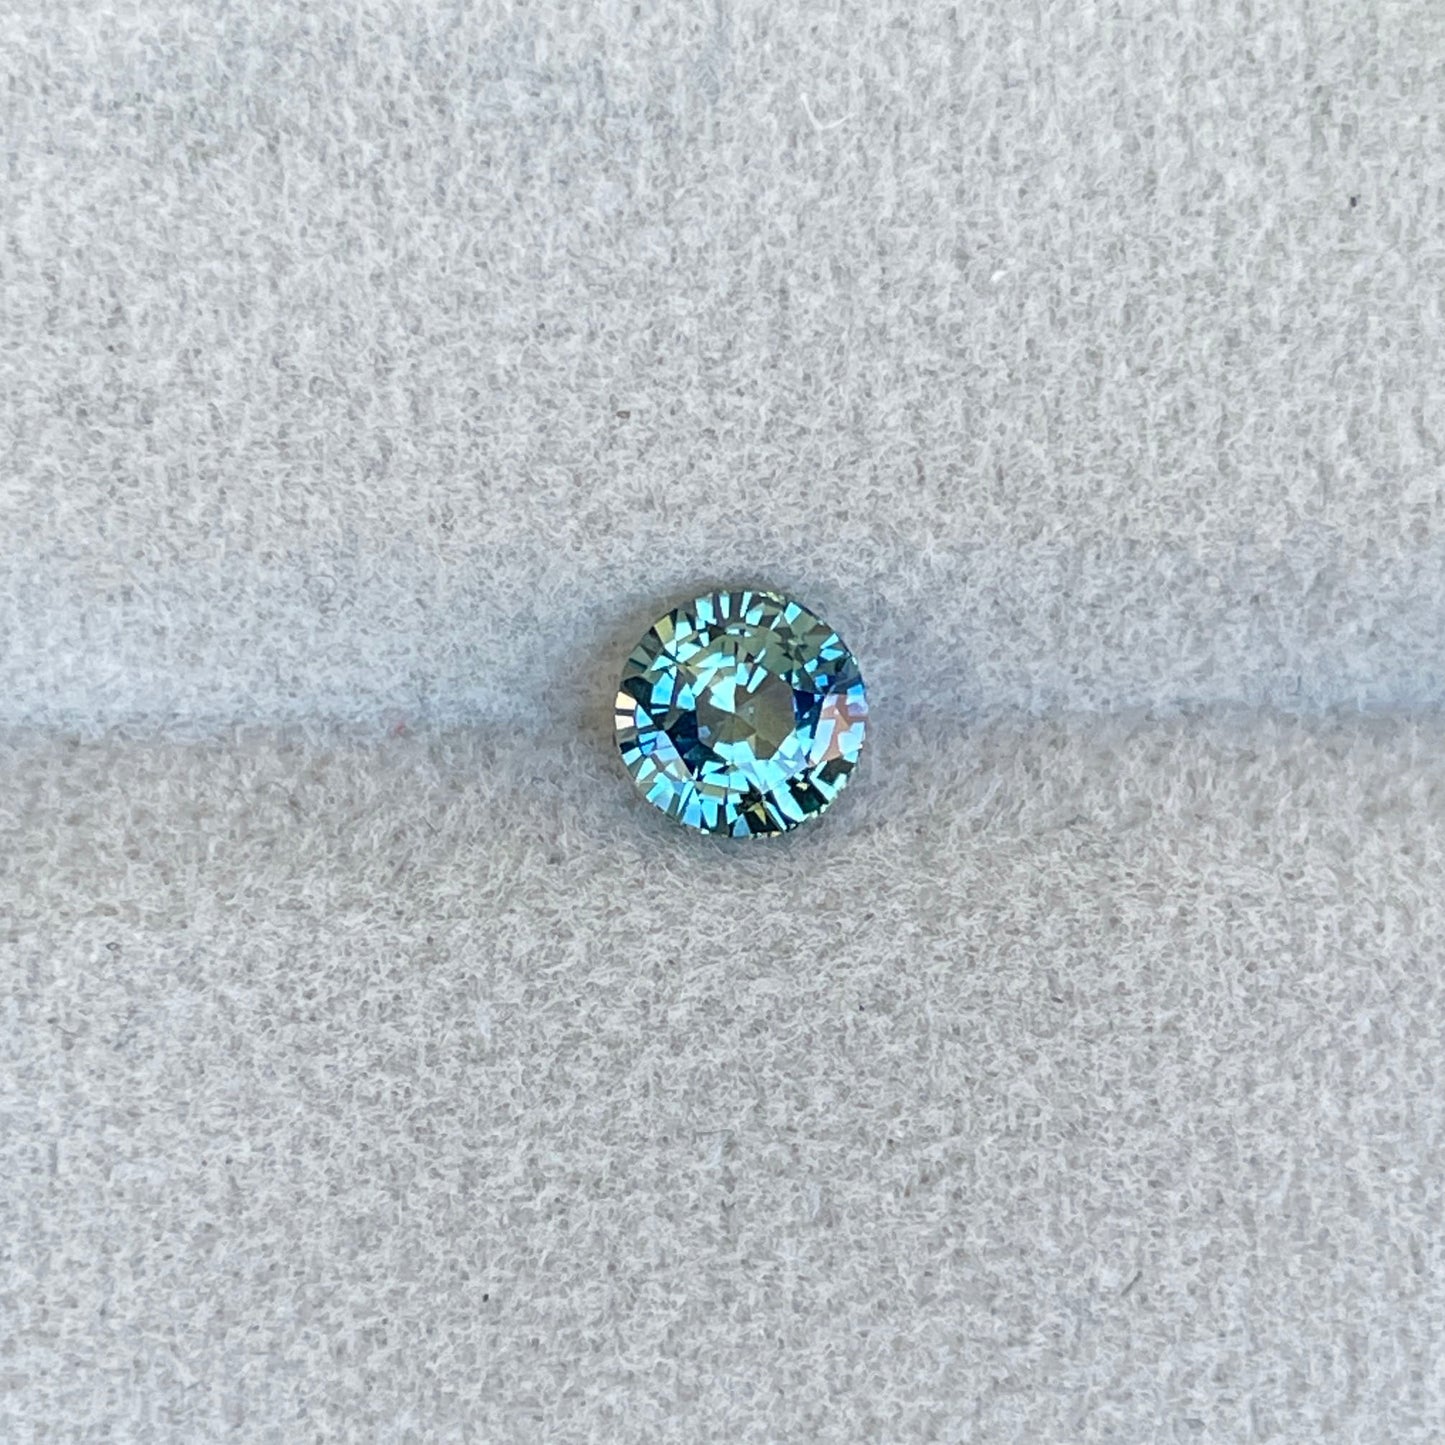 1.00 crt for Teal Sapphire Ring, Blue Green Sapphire, Wedding Bridal ring, Big Sur teal sapphire